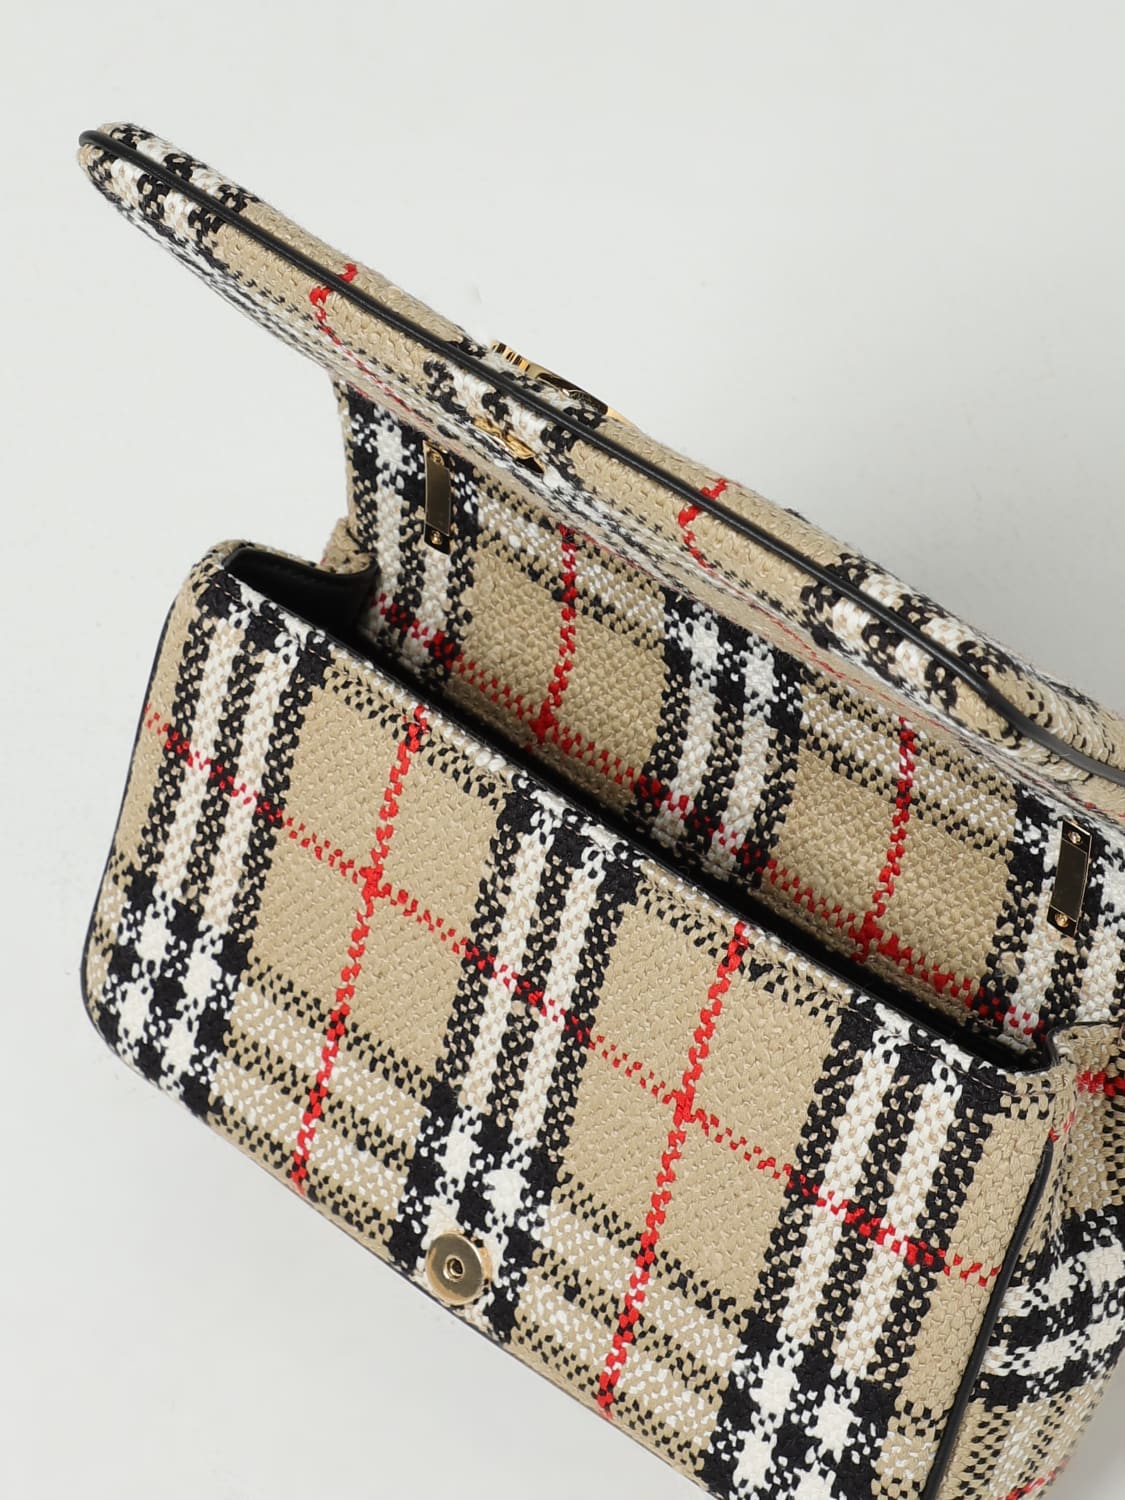 Burberry Lola bag in check wool blend